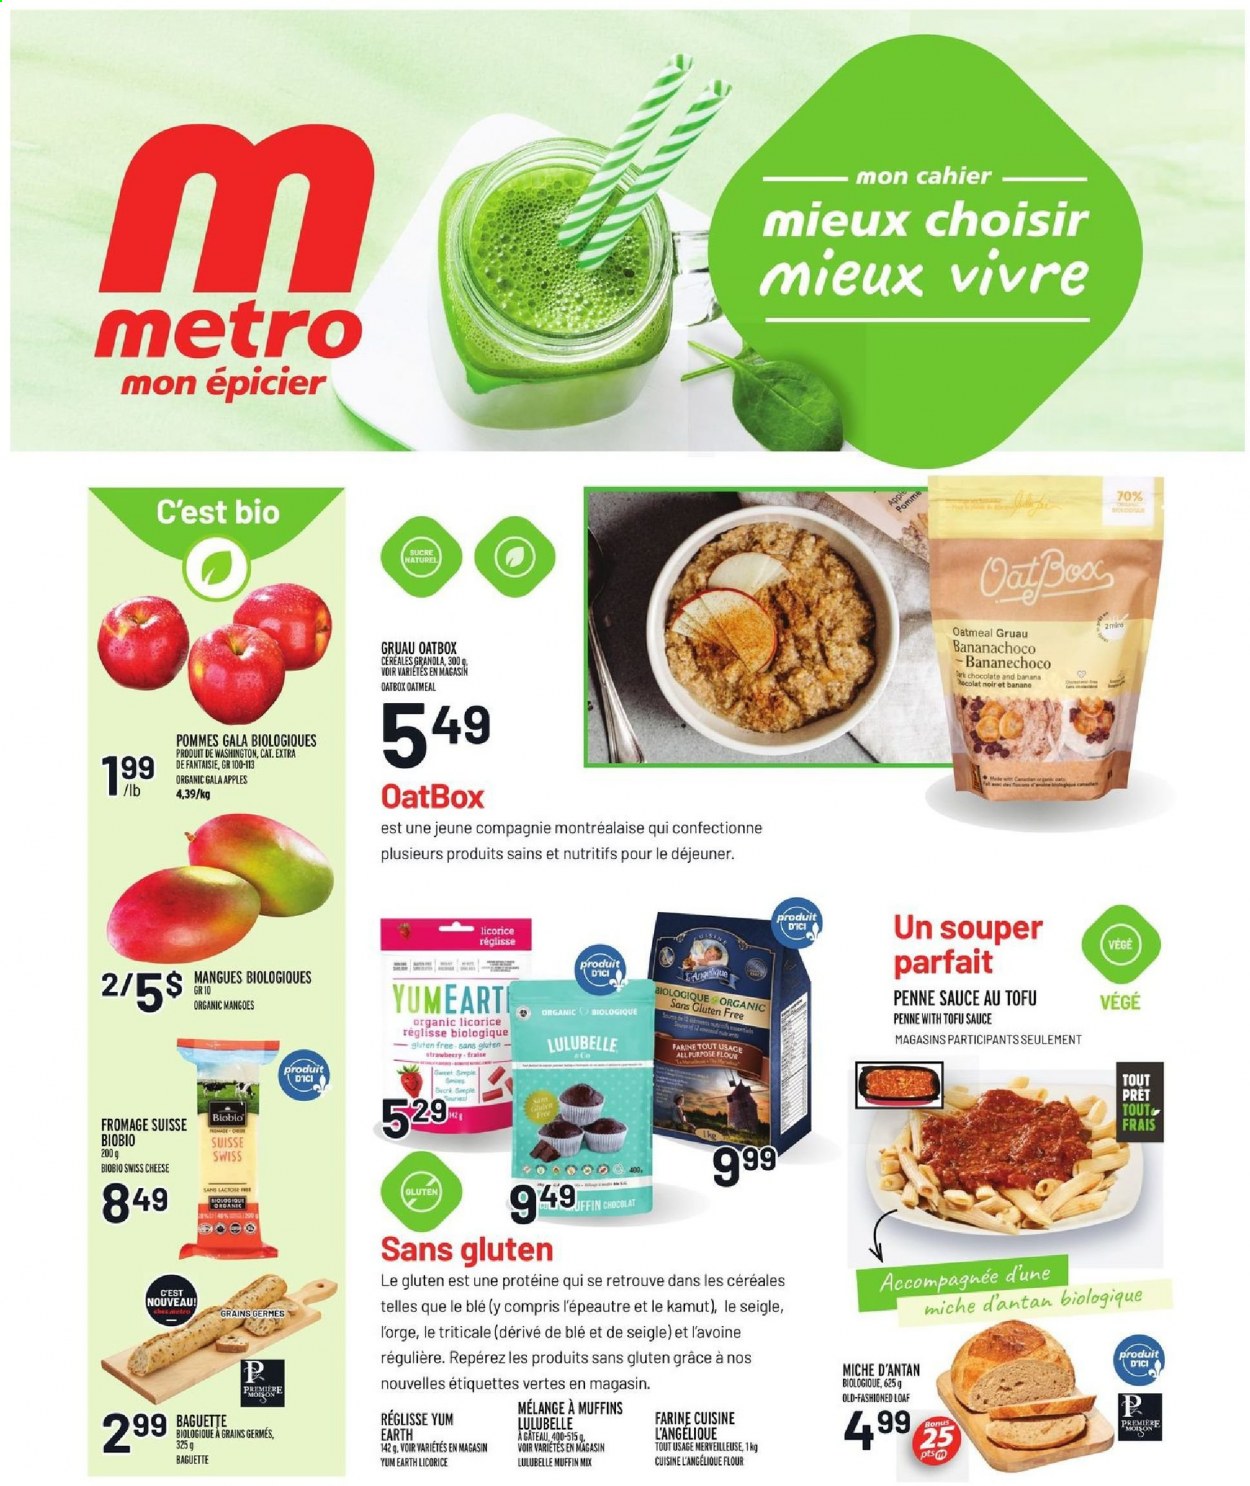 thumbnail - Metro Flyer - January 14, 2021 - January 20, 2021 - Sales products - muffin mix, apples, Gala, sauce, swiss cheese, cheese, all purpose flour, flour, oatmeal, oats, penne, PREMIERE, granola. Page 12.